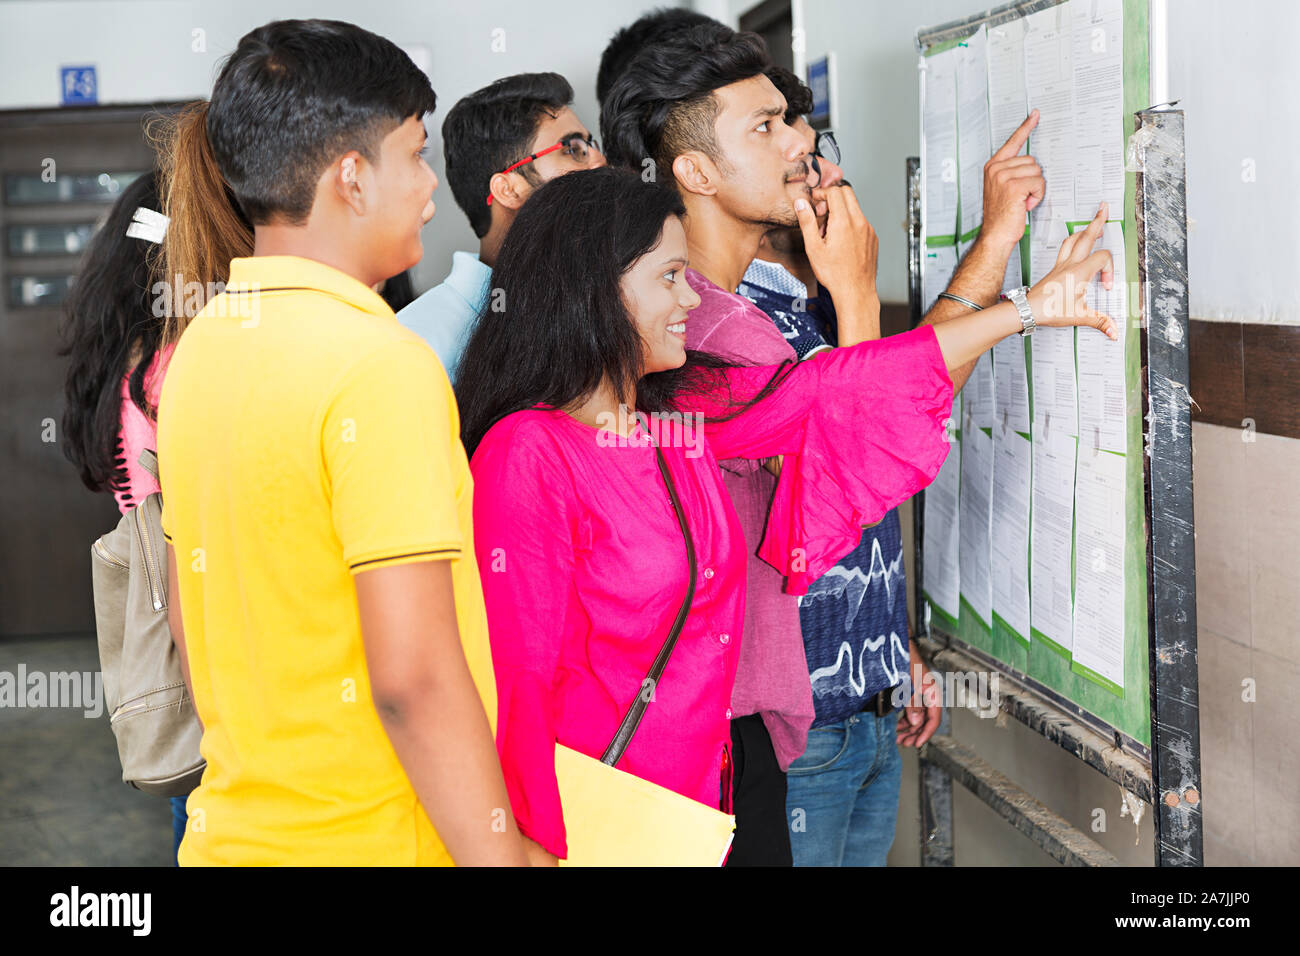 College Campus Boys And Girls Students Checking Exam result on Bulletin Board Stock Photo